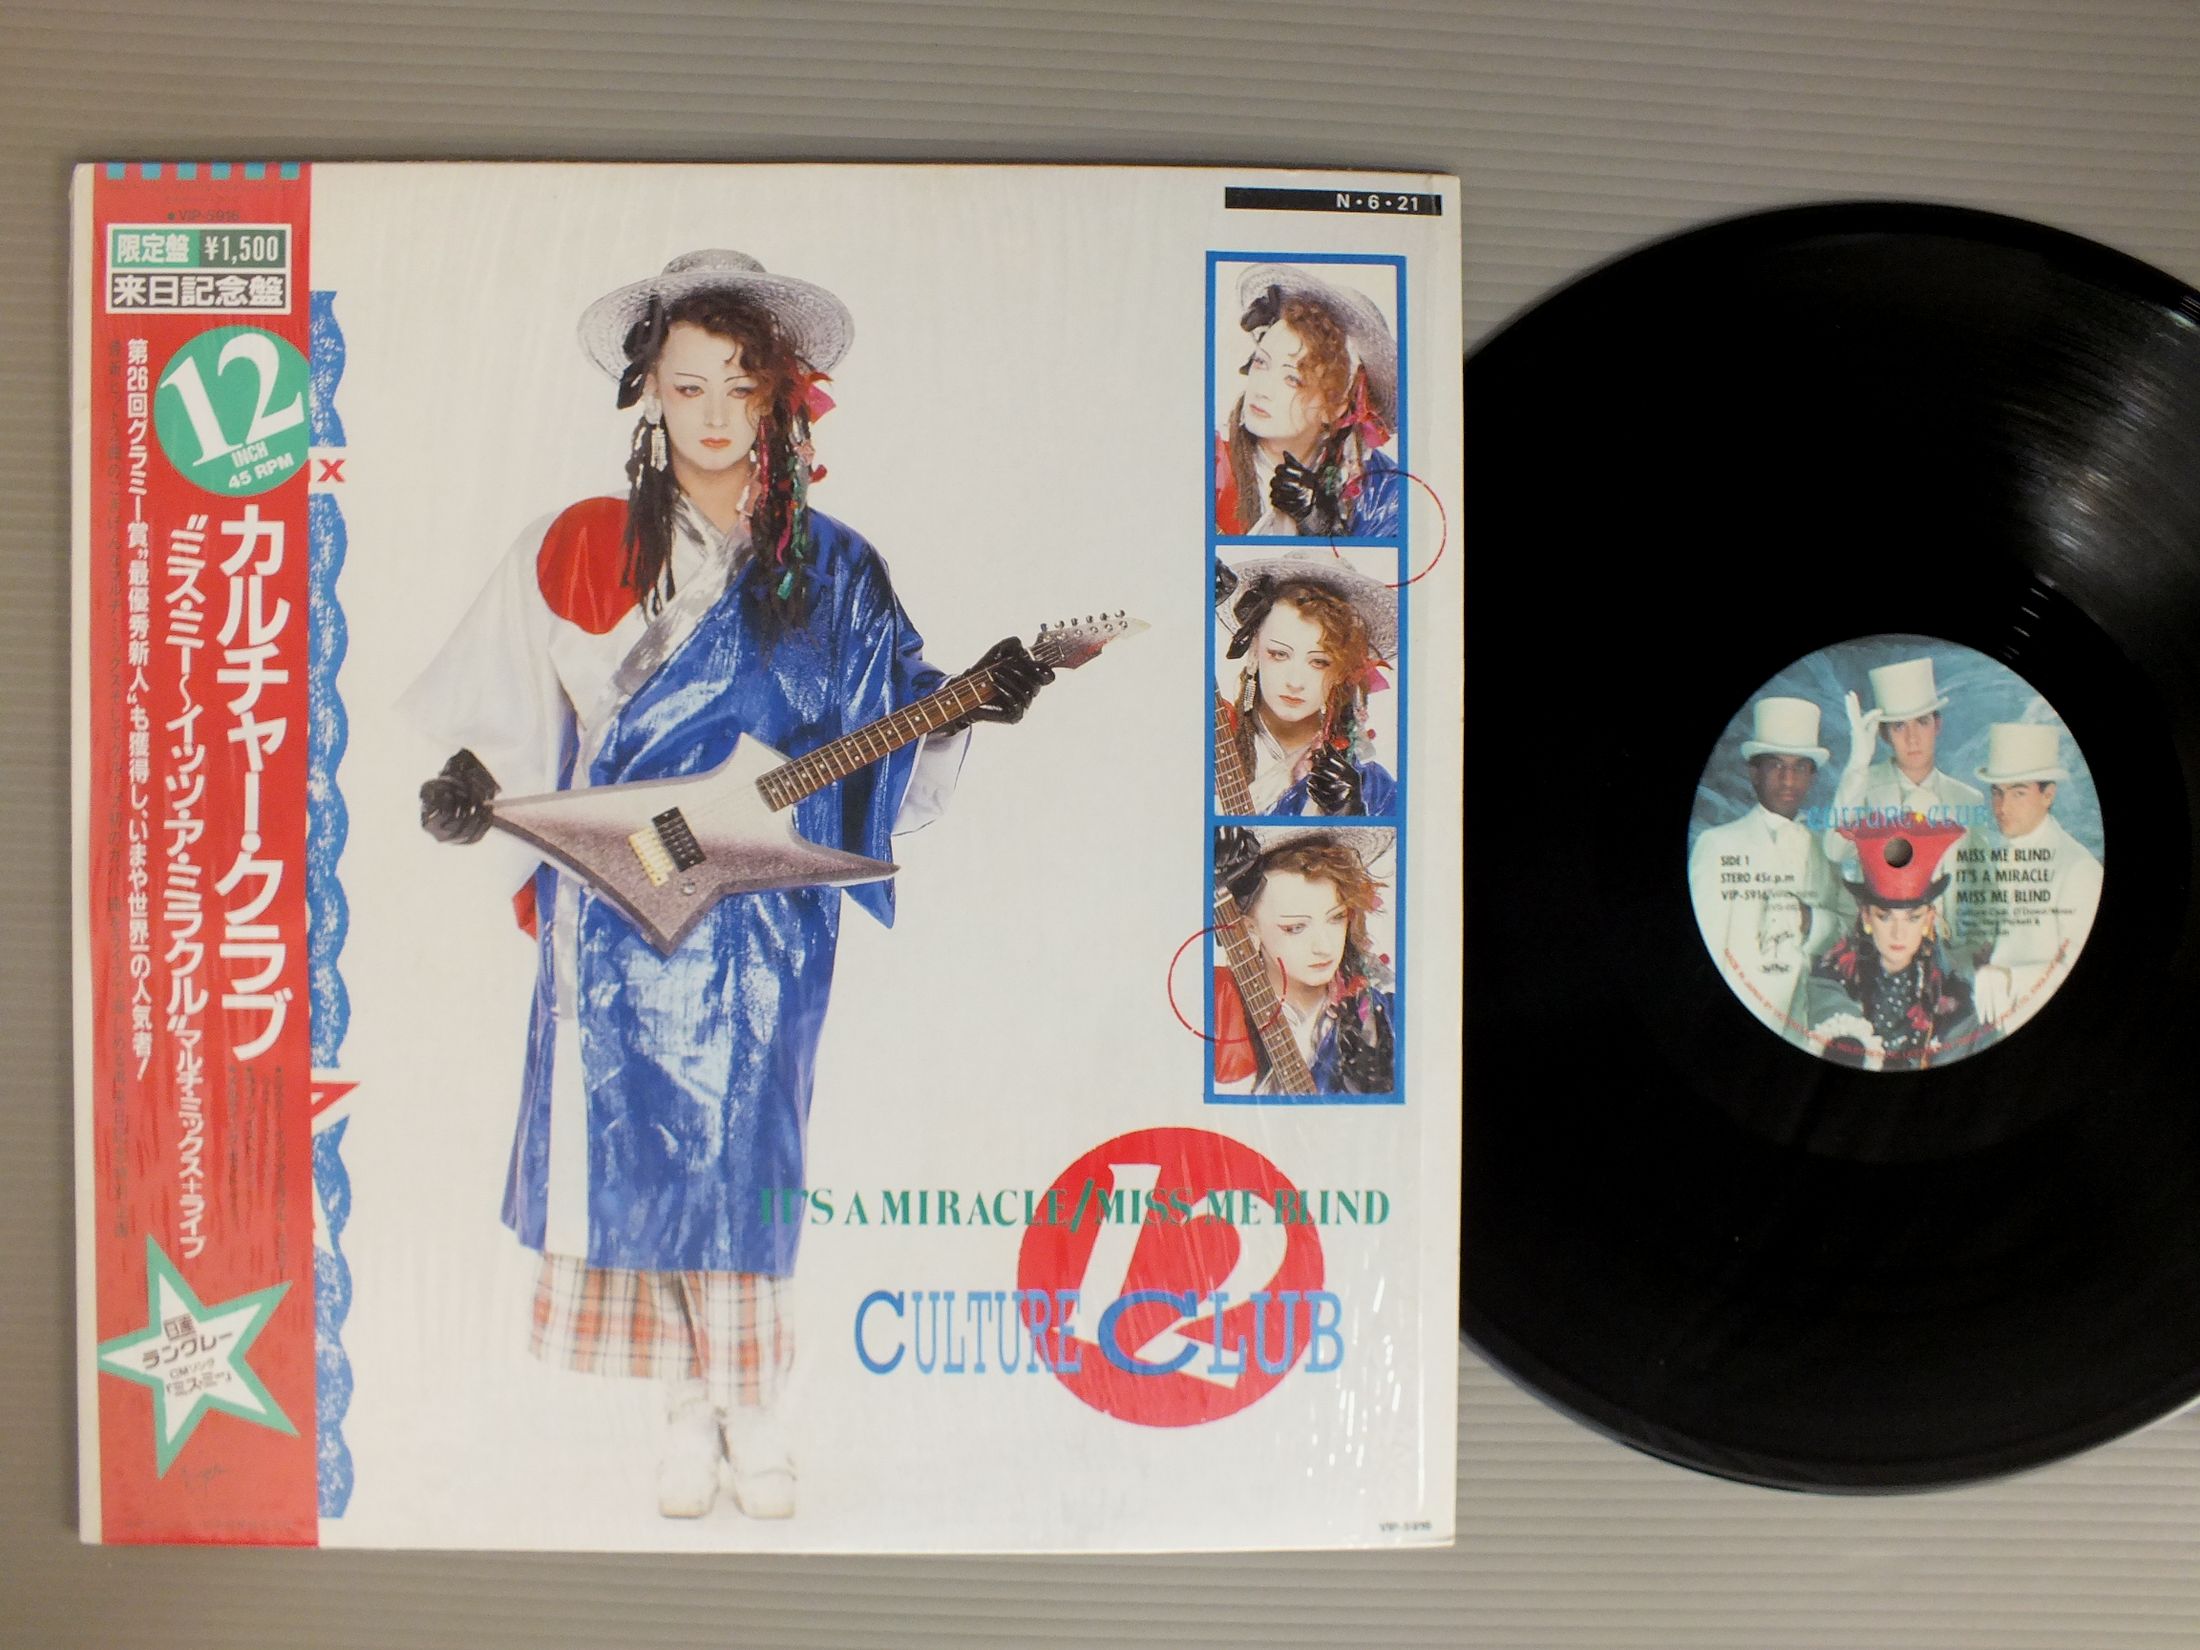 Culture Club Miss me blind it s a miracle (Vinyl Records, LP, CD) on ...